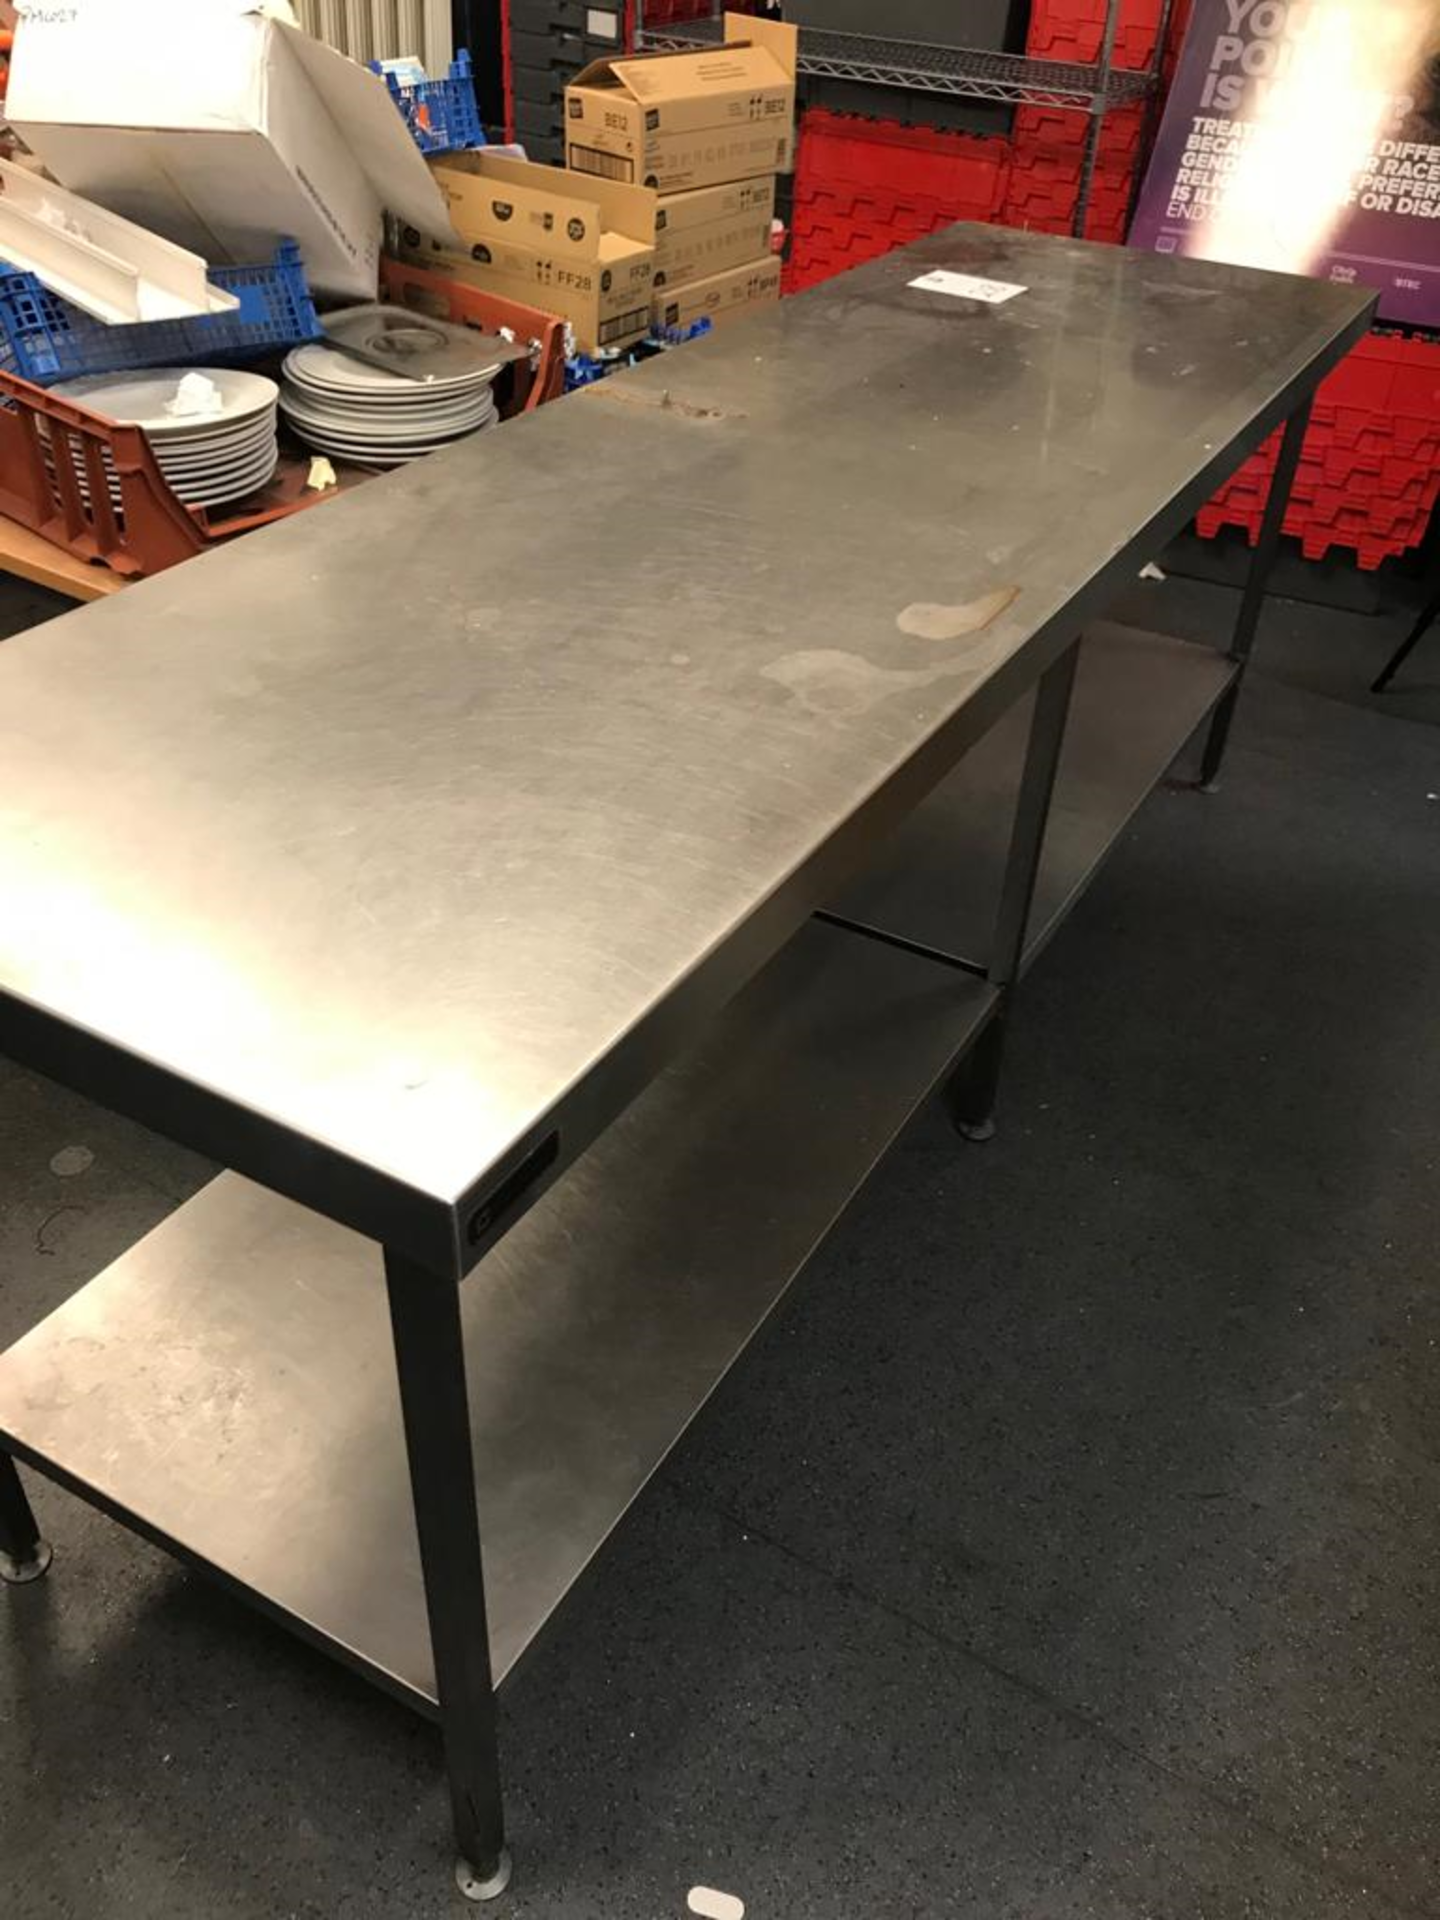 Stainless Steel Counter with Shelf Below - Image 6 of 8